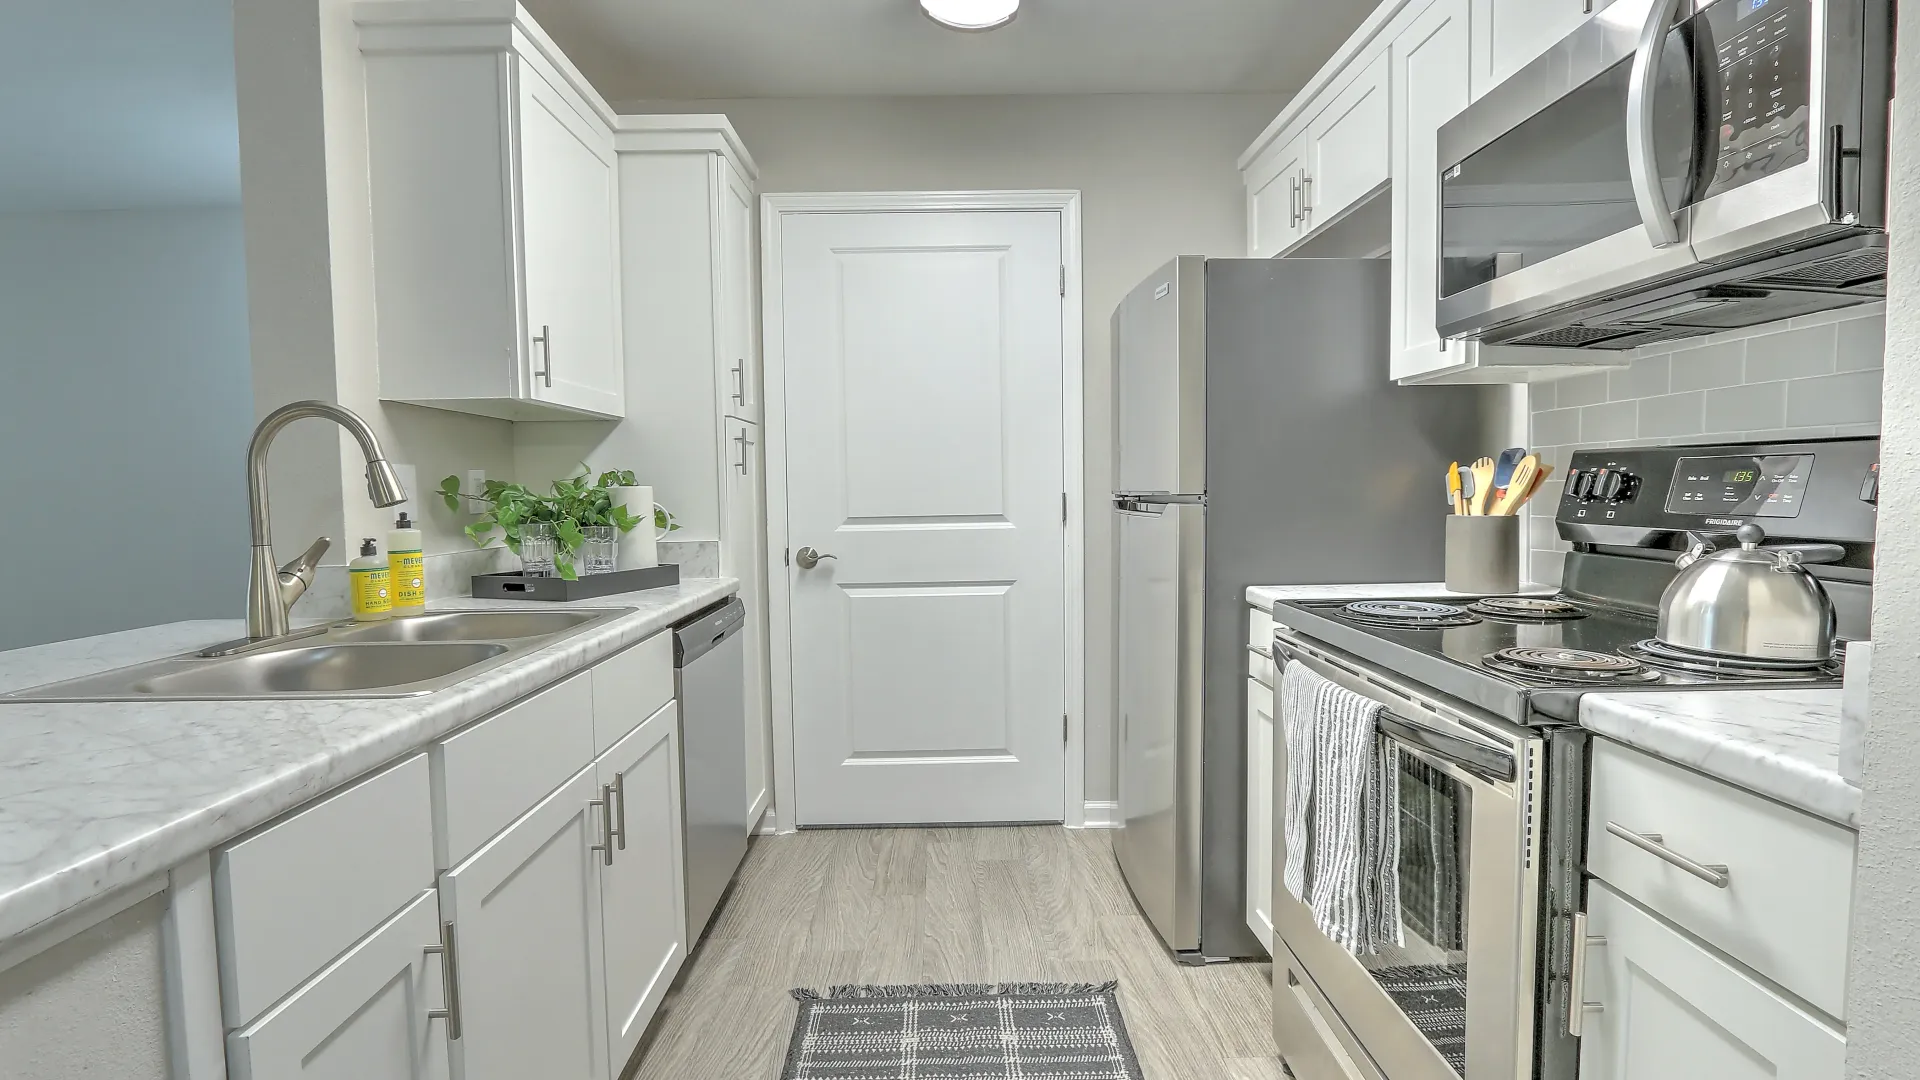 Open kitchen with white cabinetry, stunning white Carrara countertops, stainless steel appliances, and built in pantry.